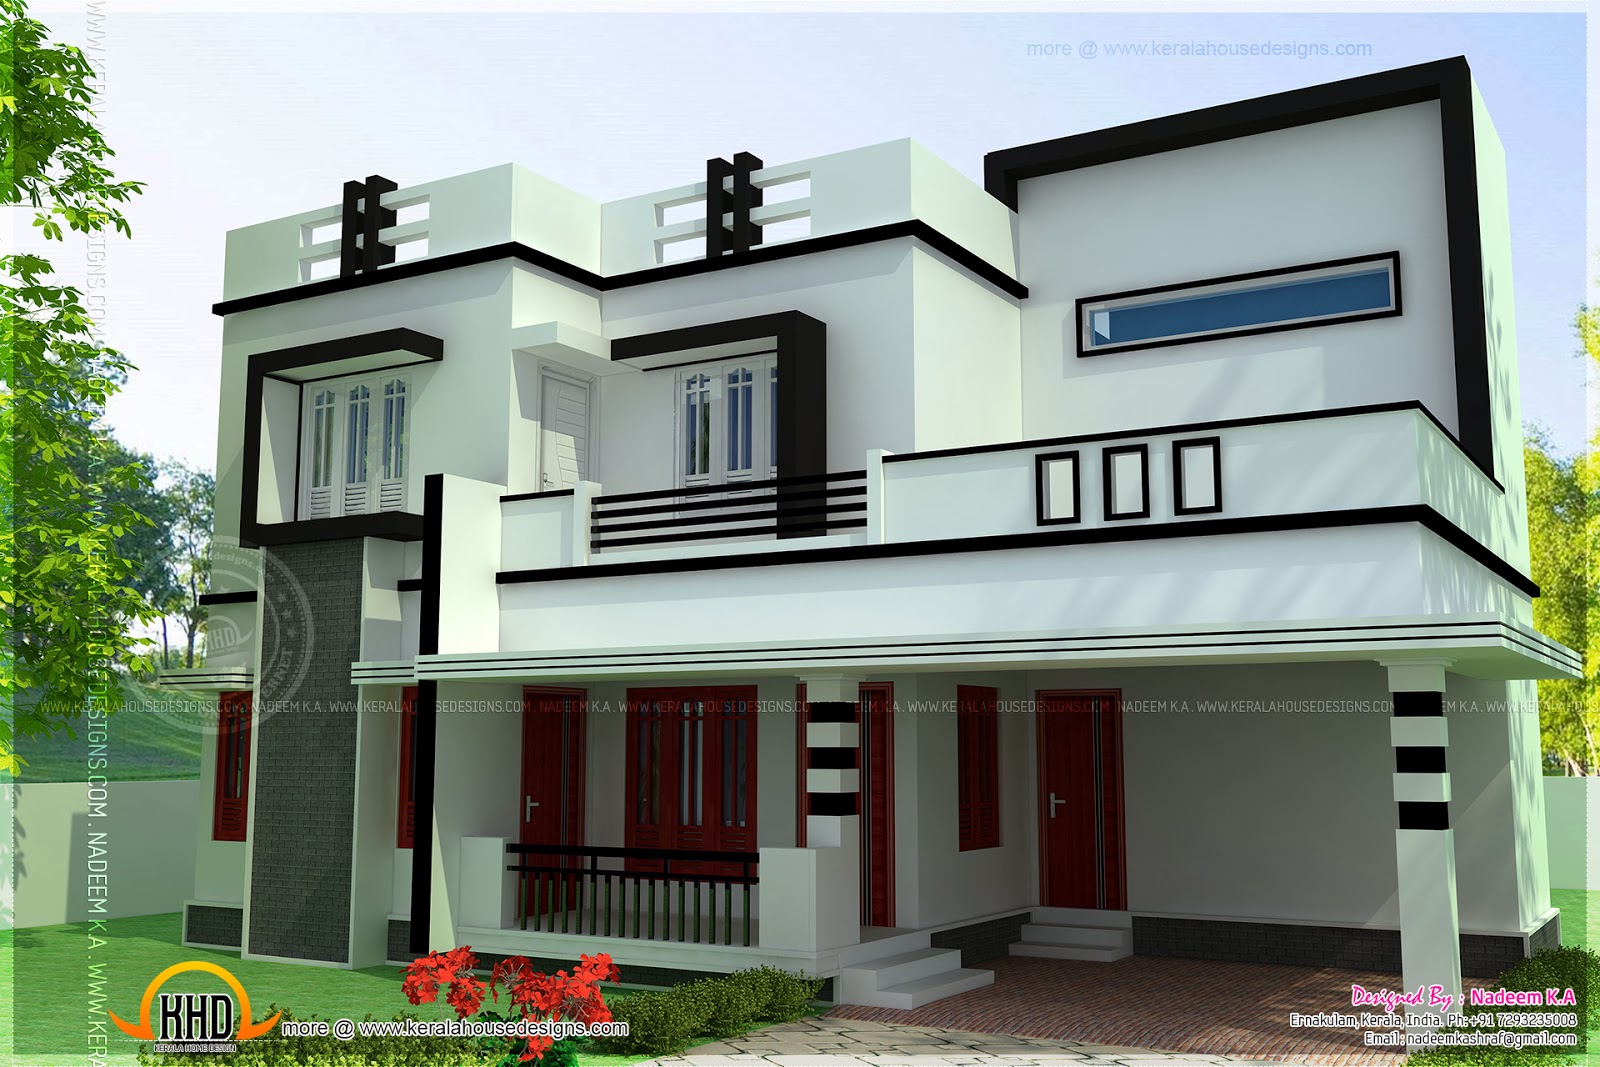  Flat  roof  4  bedroom  modern house  Kerala home  design and 